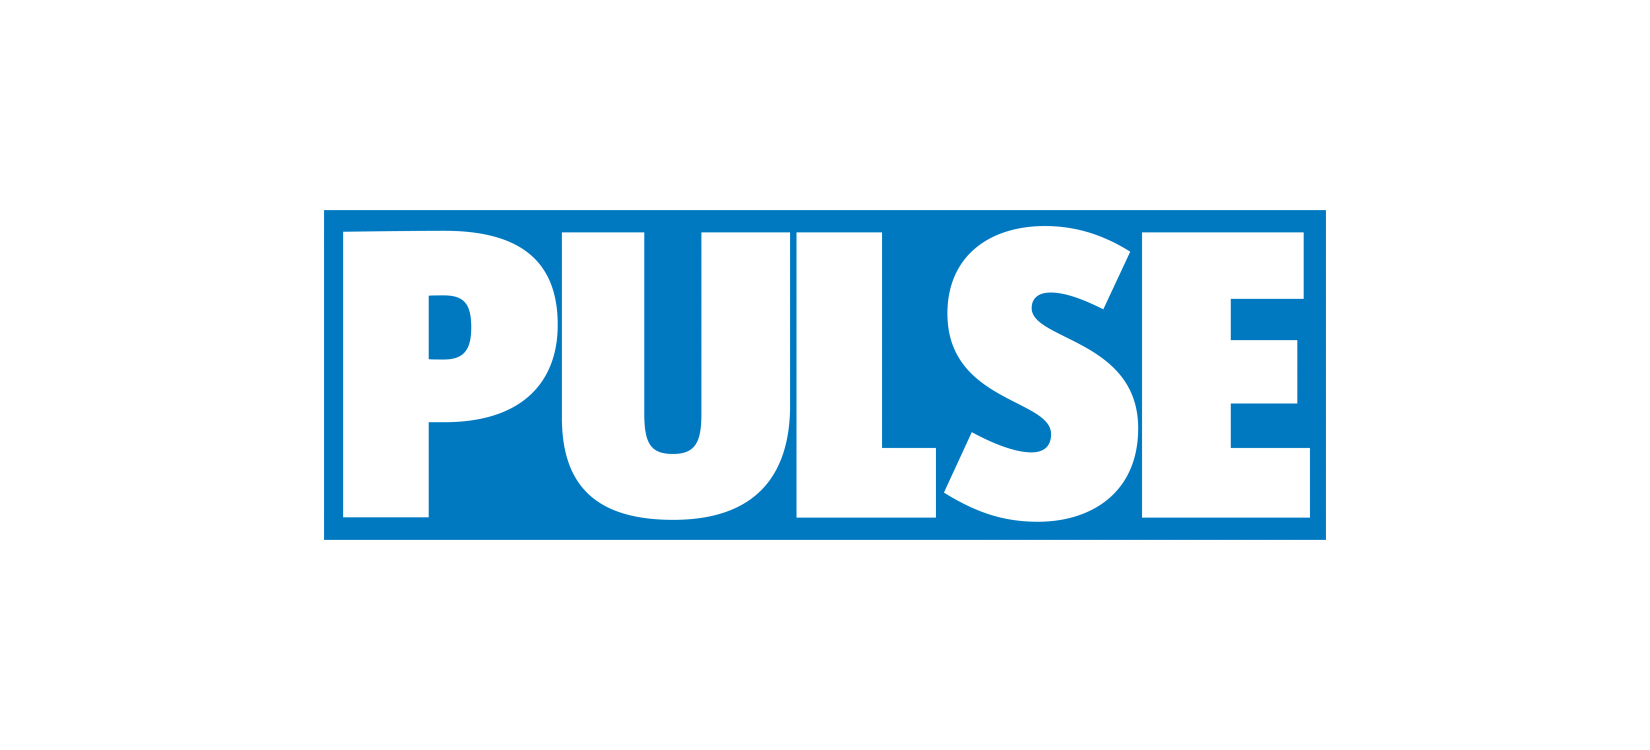 Pulse most widely-read non-reference journal among GPs